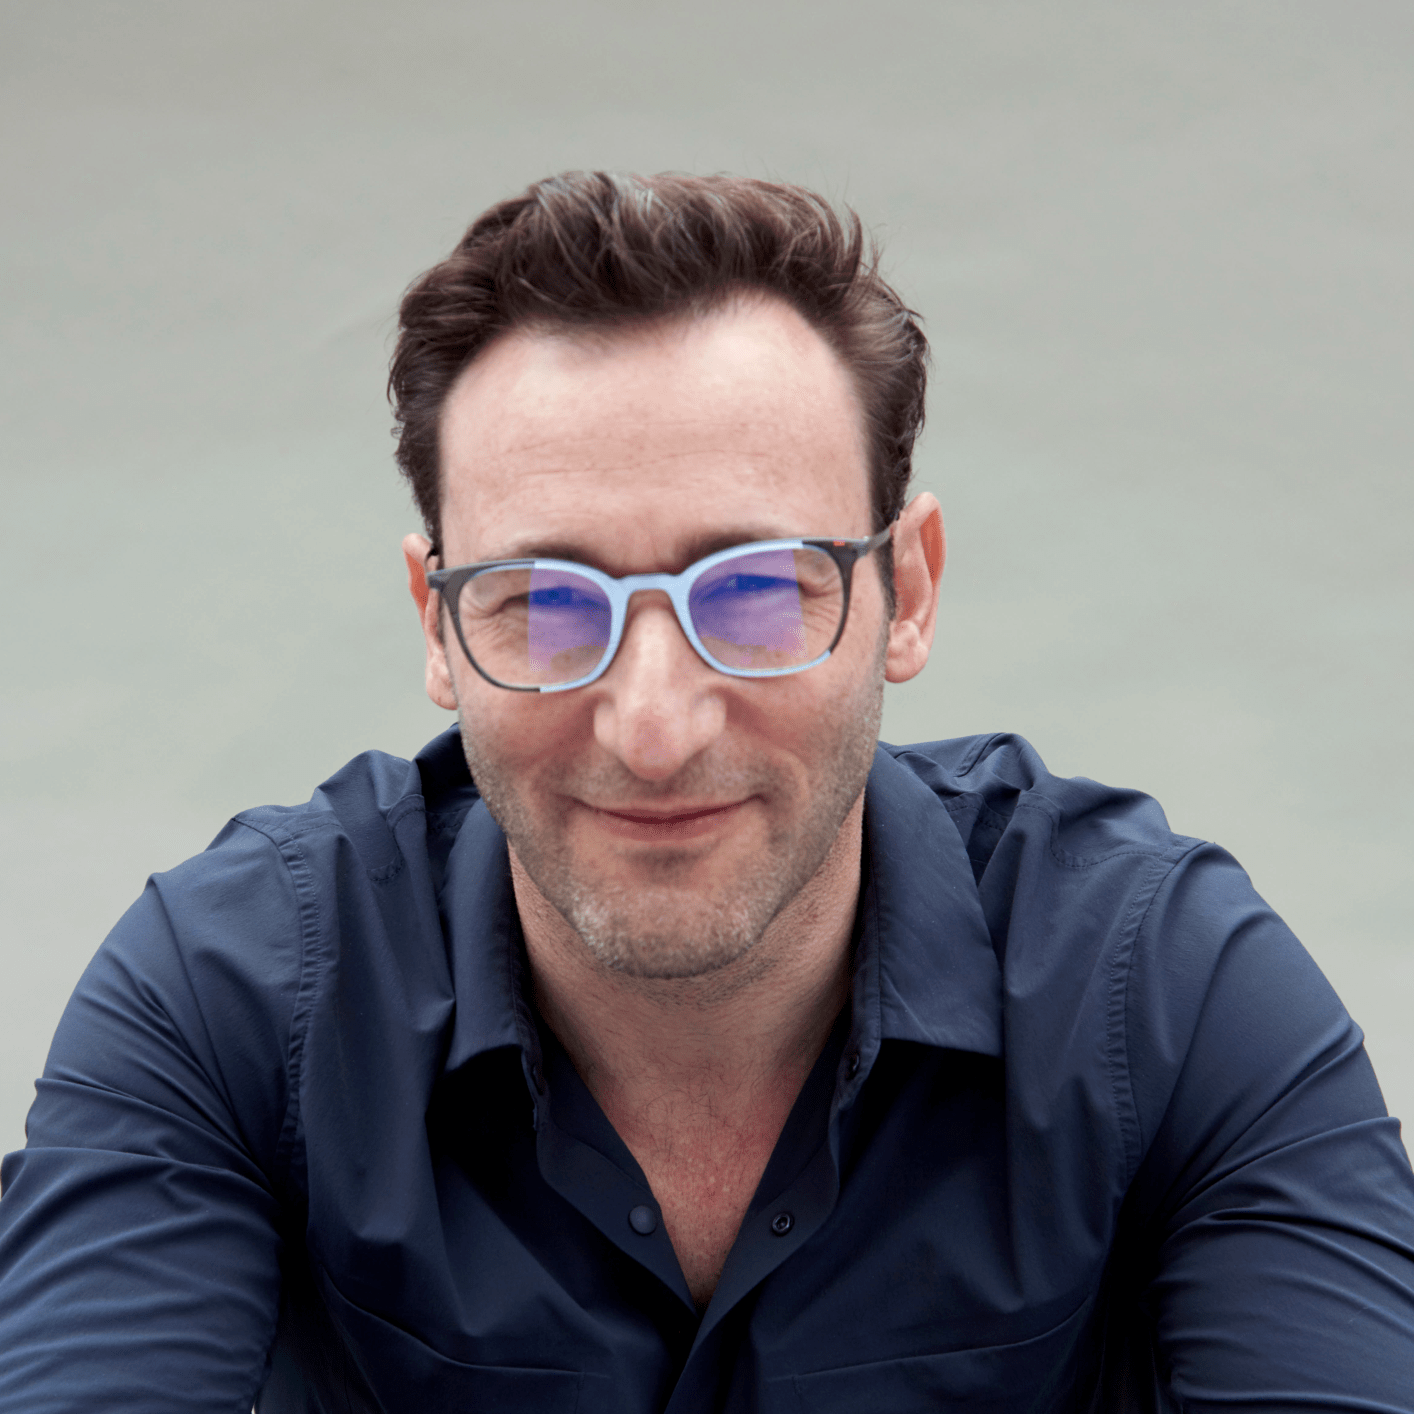 Episode 82- Simon Sinek on How to Lead with an Infinite Mindset - Molly